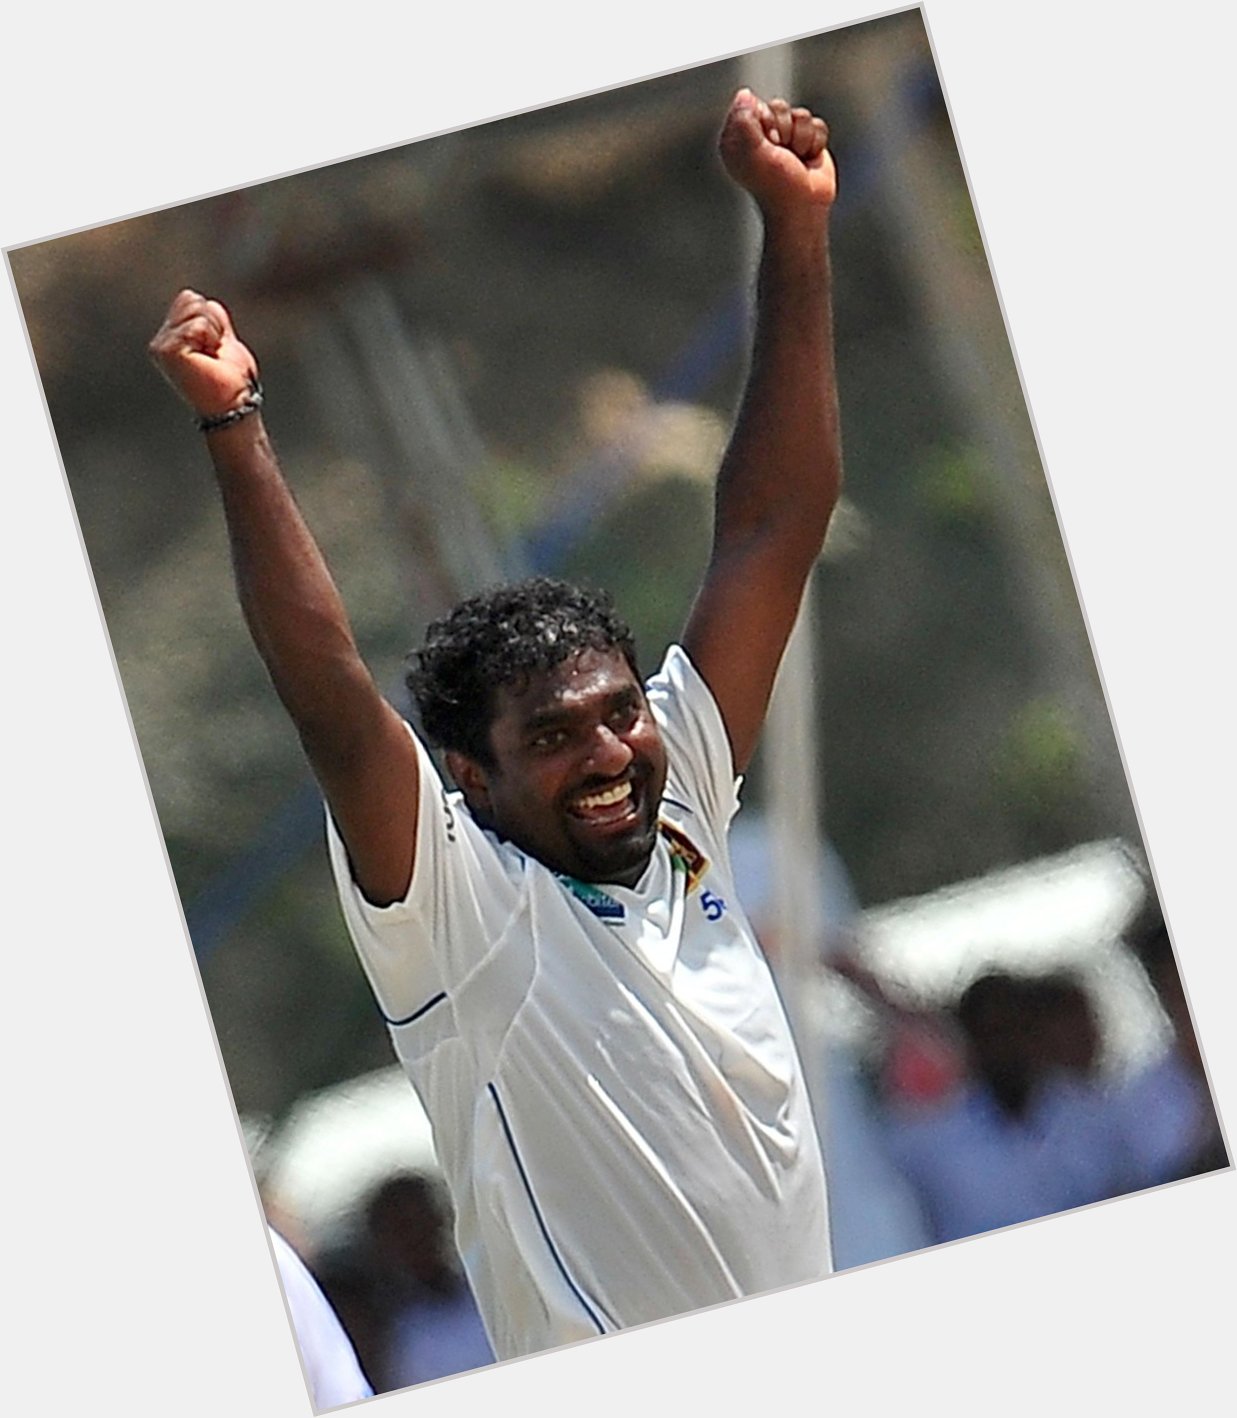 Happy Birthday to the leading wicket taker in both Tests (800) and ODIs (534), Muttiah Muralitharan! 